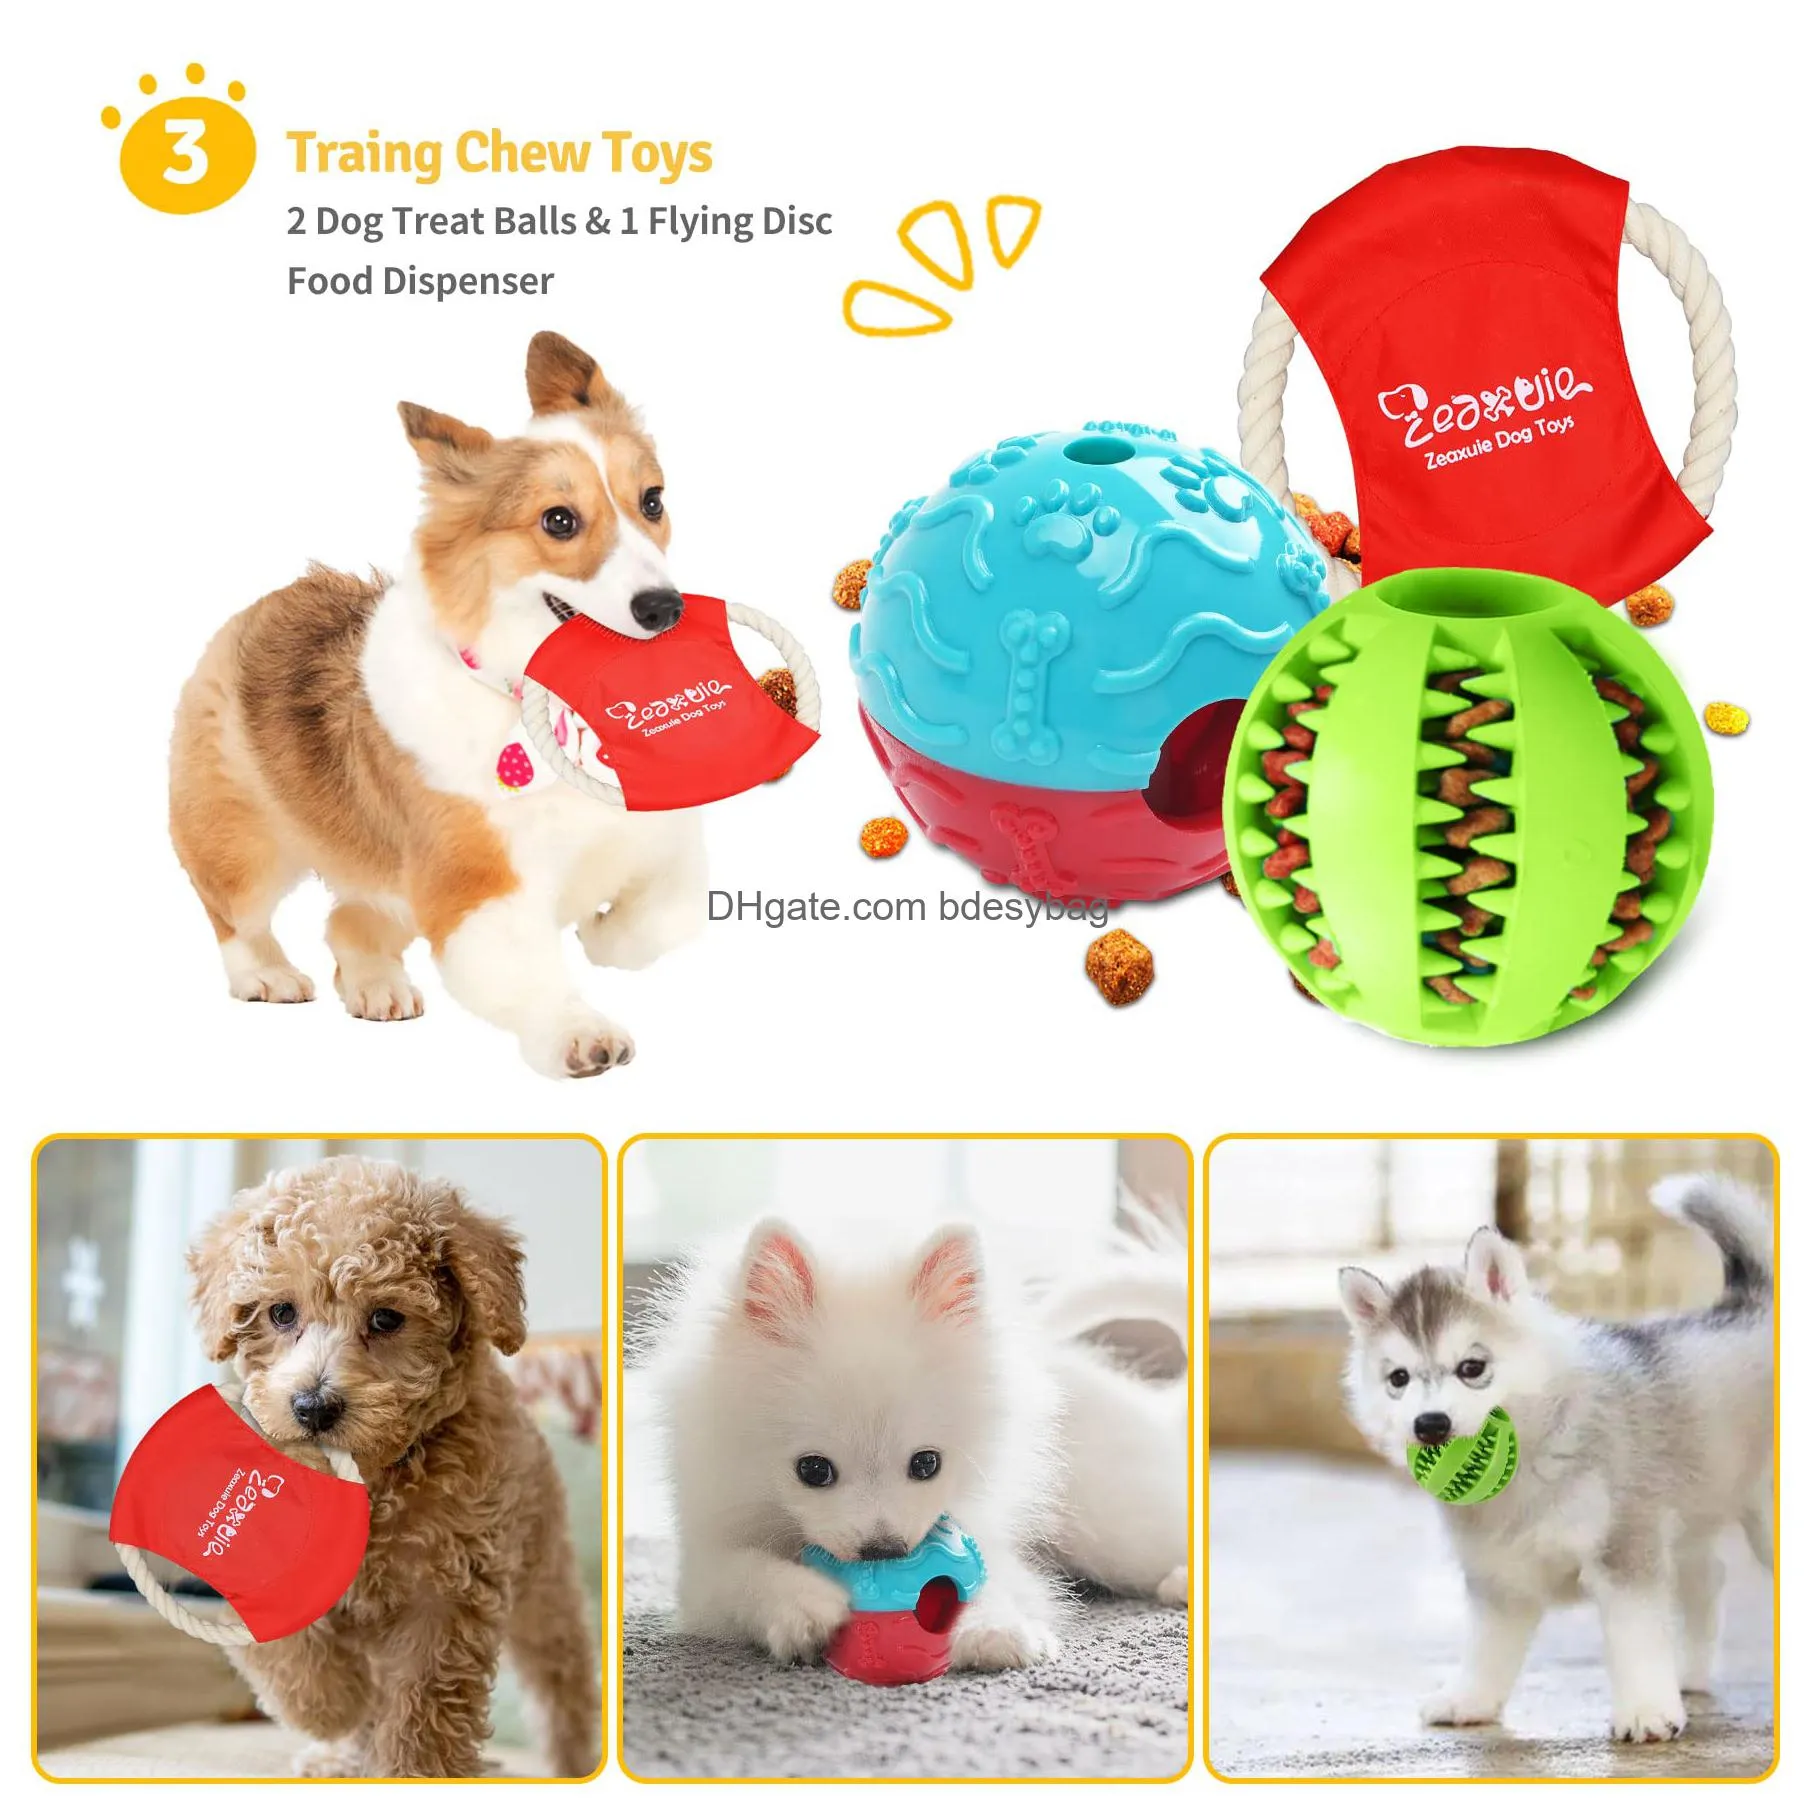 valued puppy toys for teething small dogs puppy chew toys with rope toys dog treat balls dog squeak dog chew toys